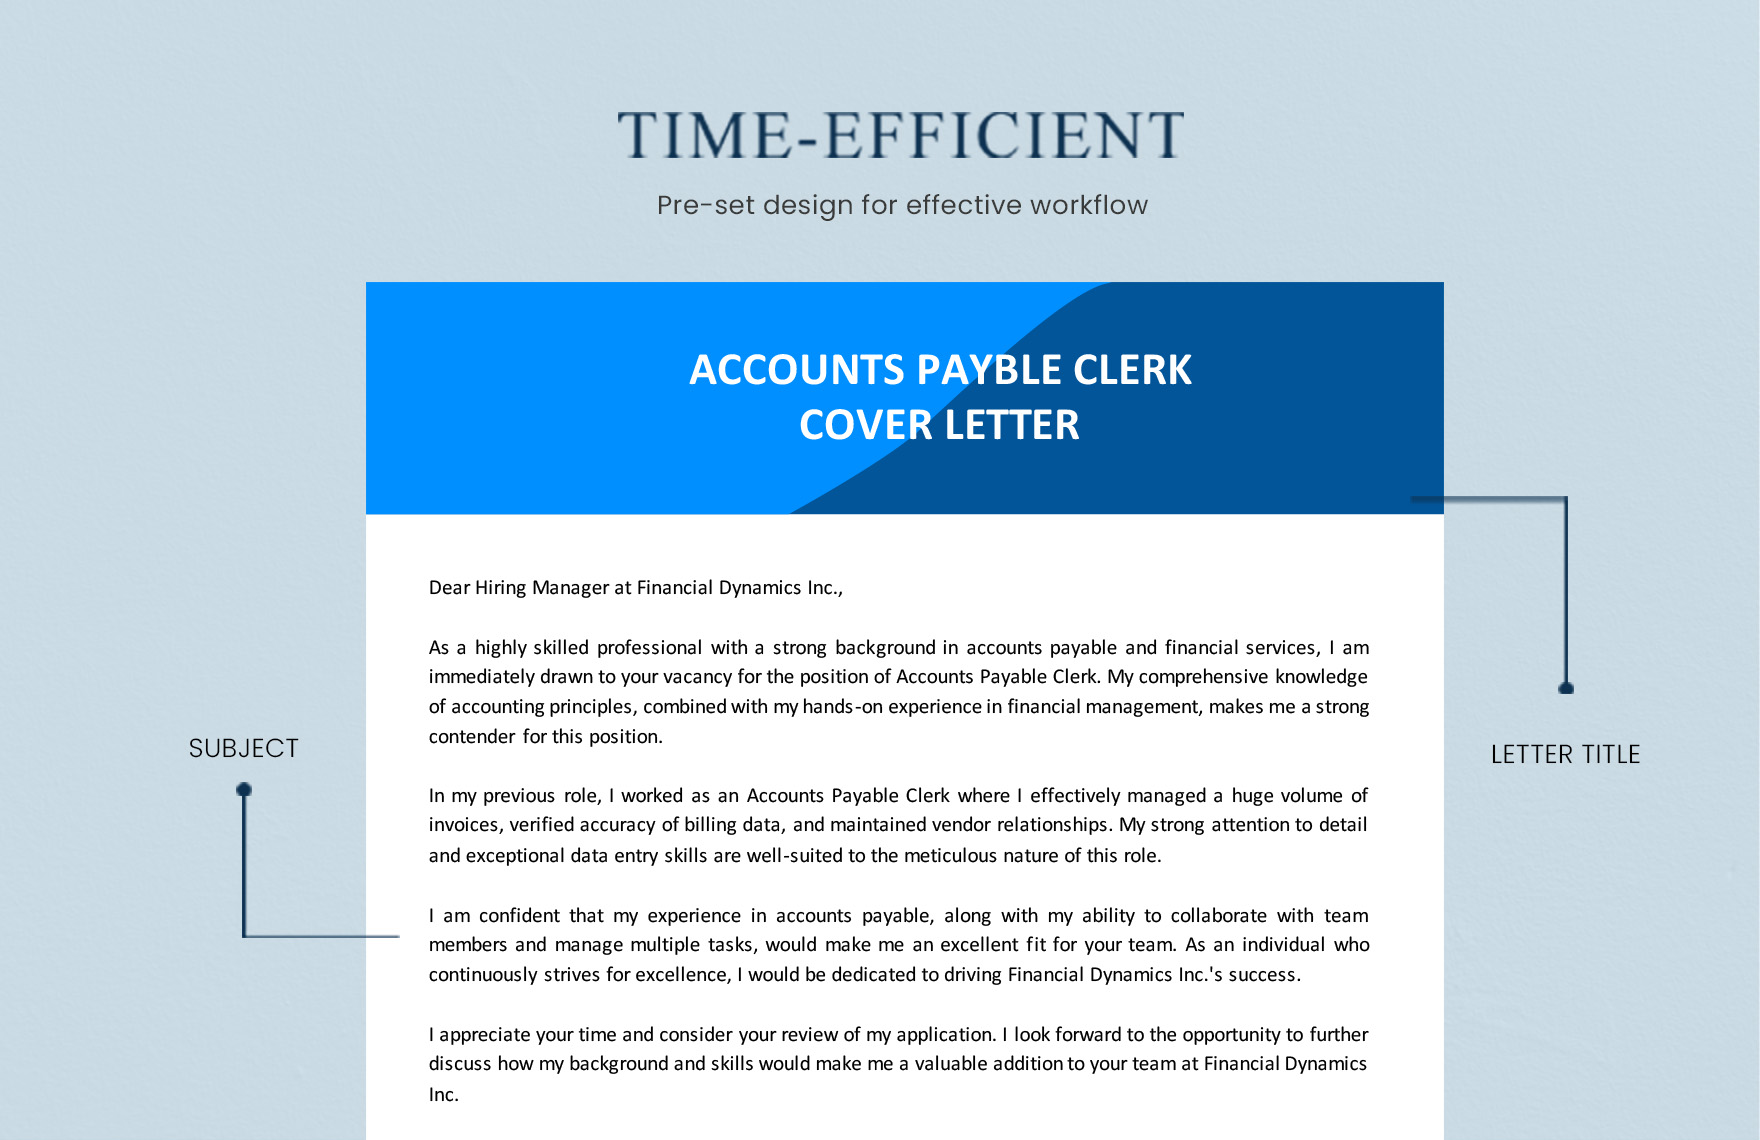 Accounts Payable Clerk Cover Letter